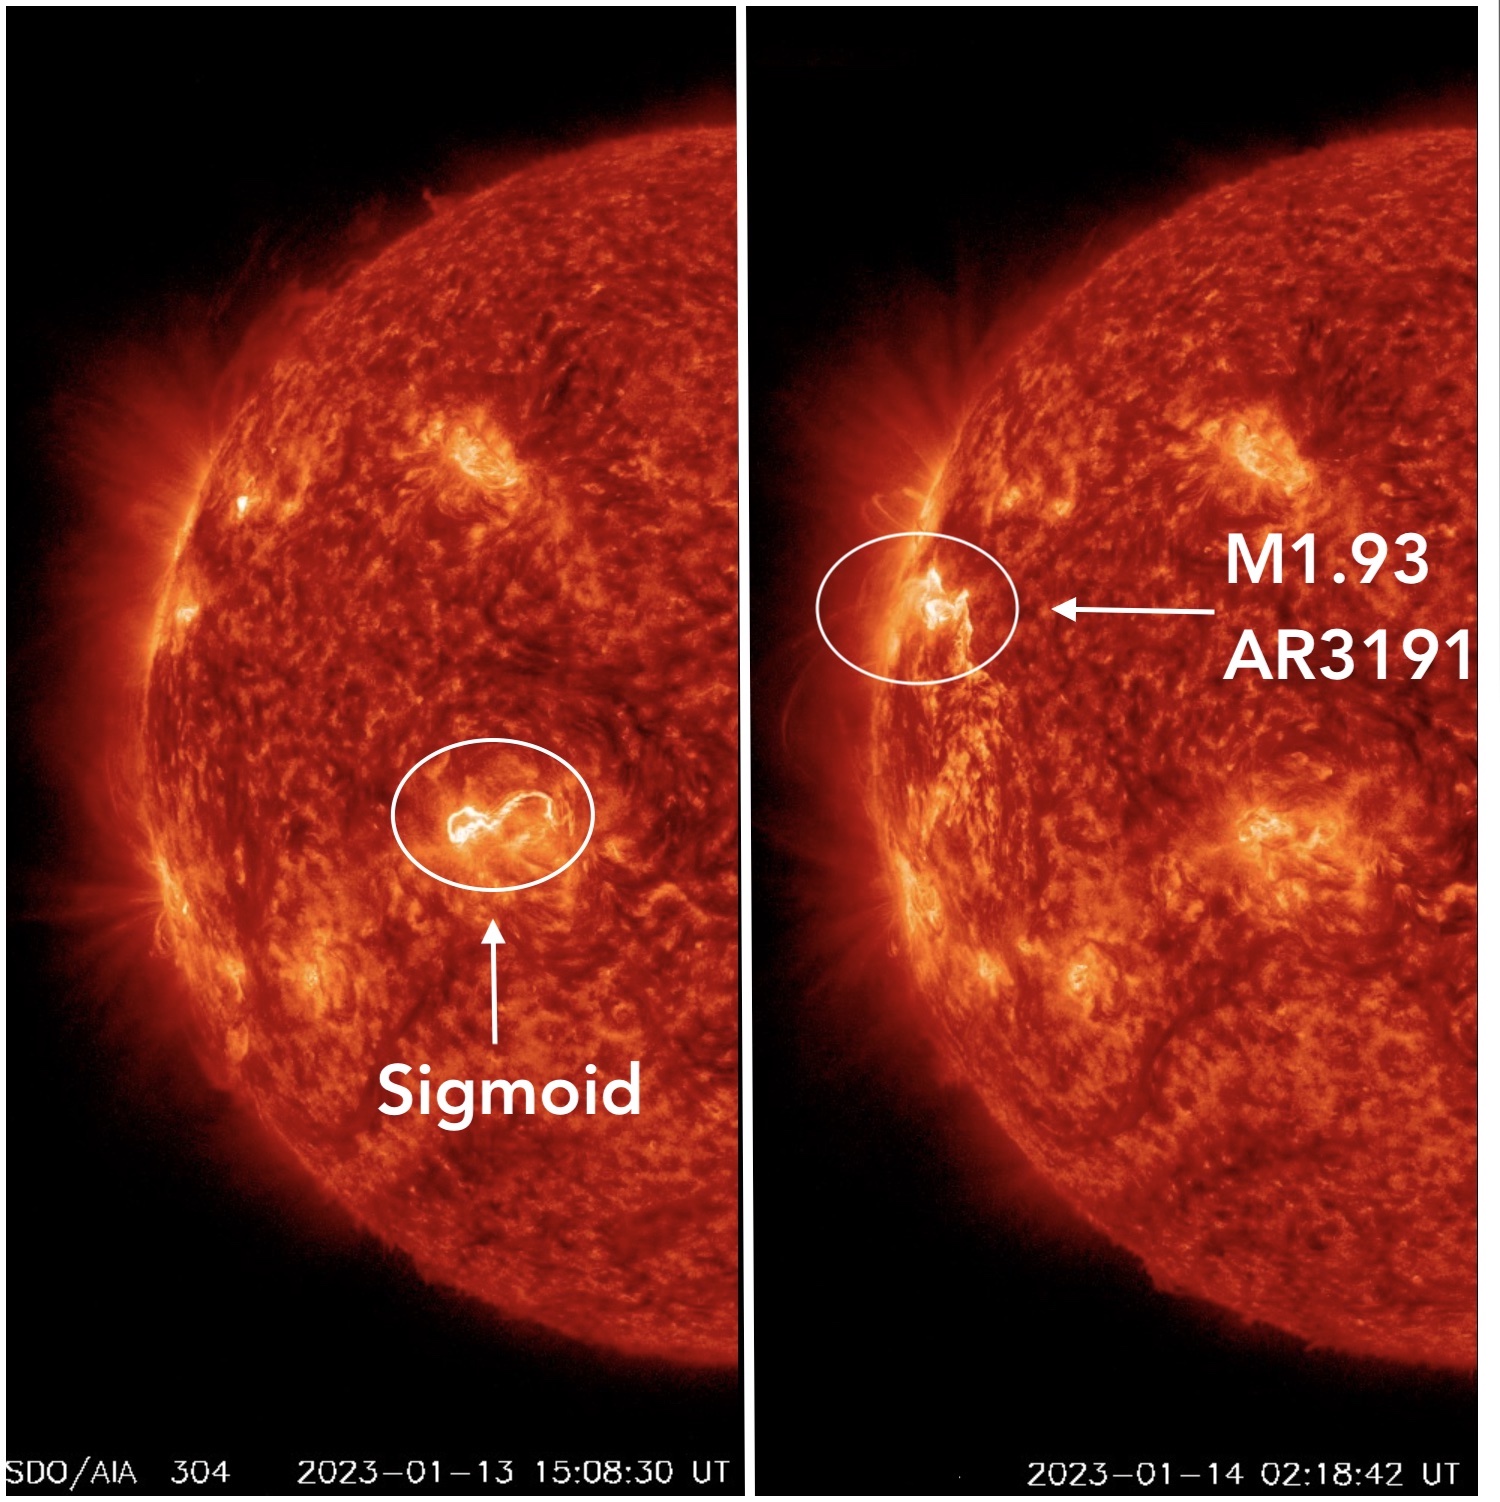 January 14, 2023 Sun activity shows a sigmoid and a M1.3 flare.